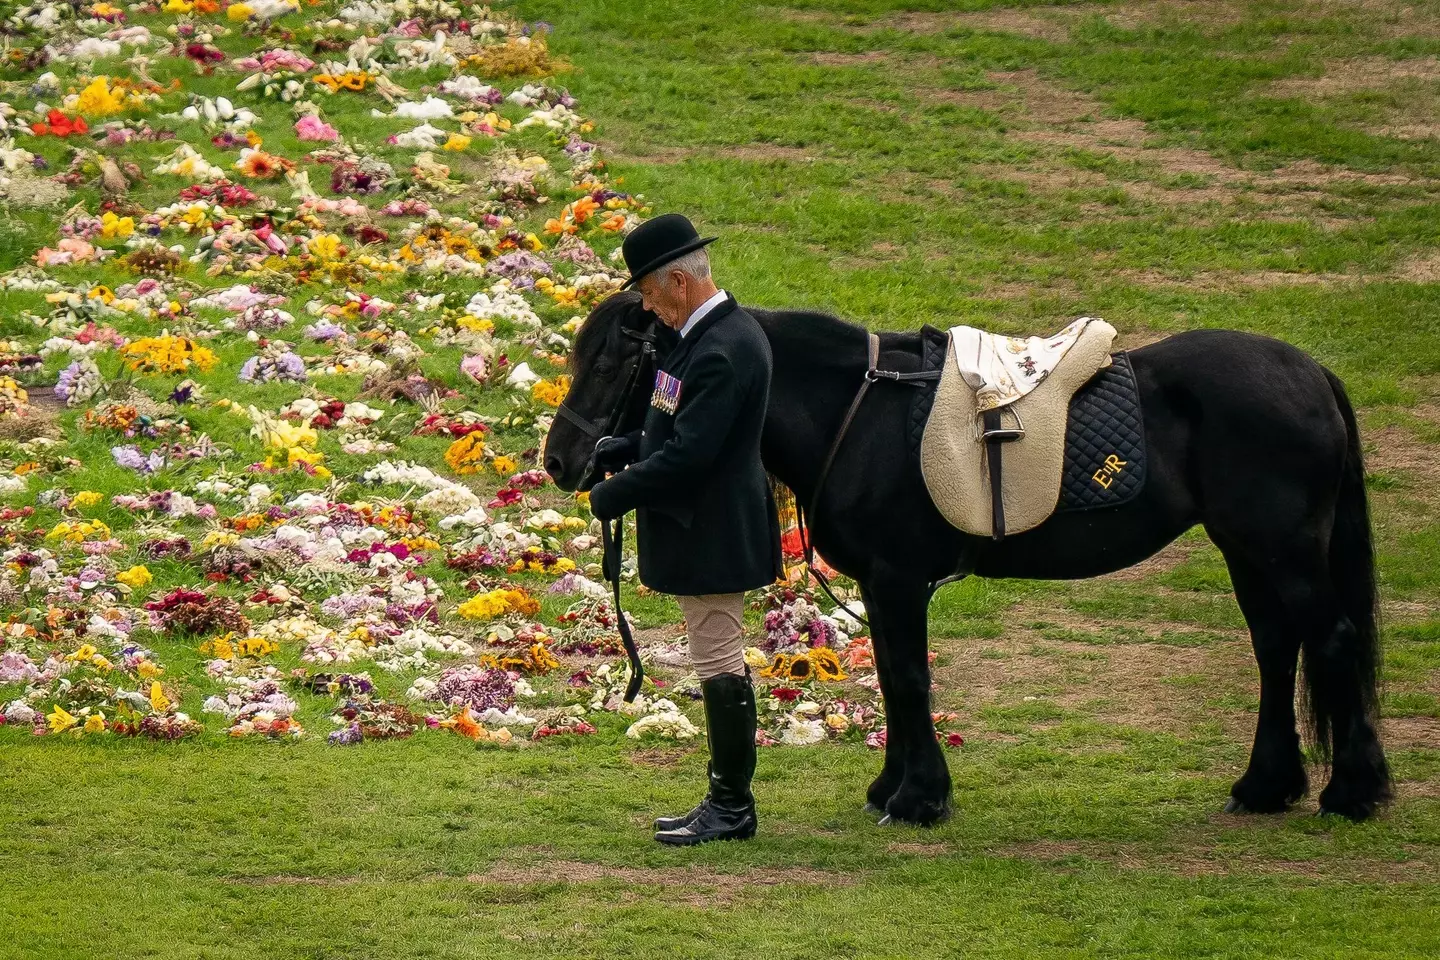 Emma was accompanied by the Queen's Stud Groom, Terry.